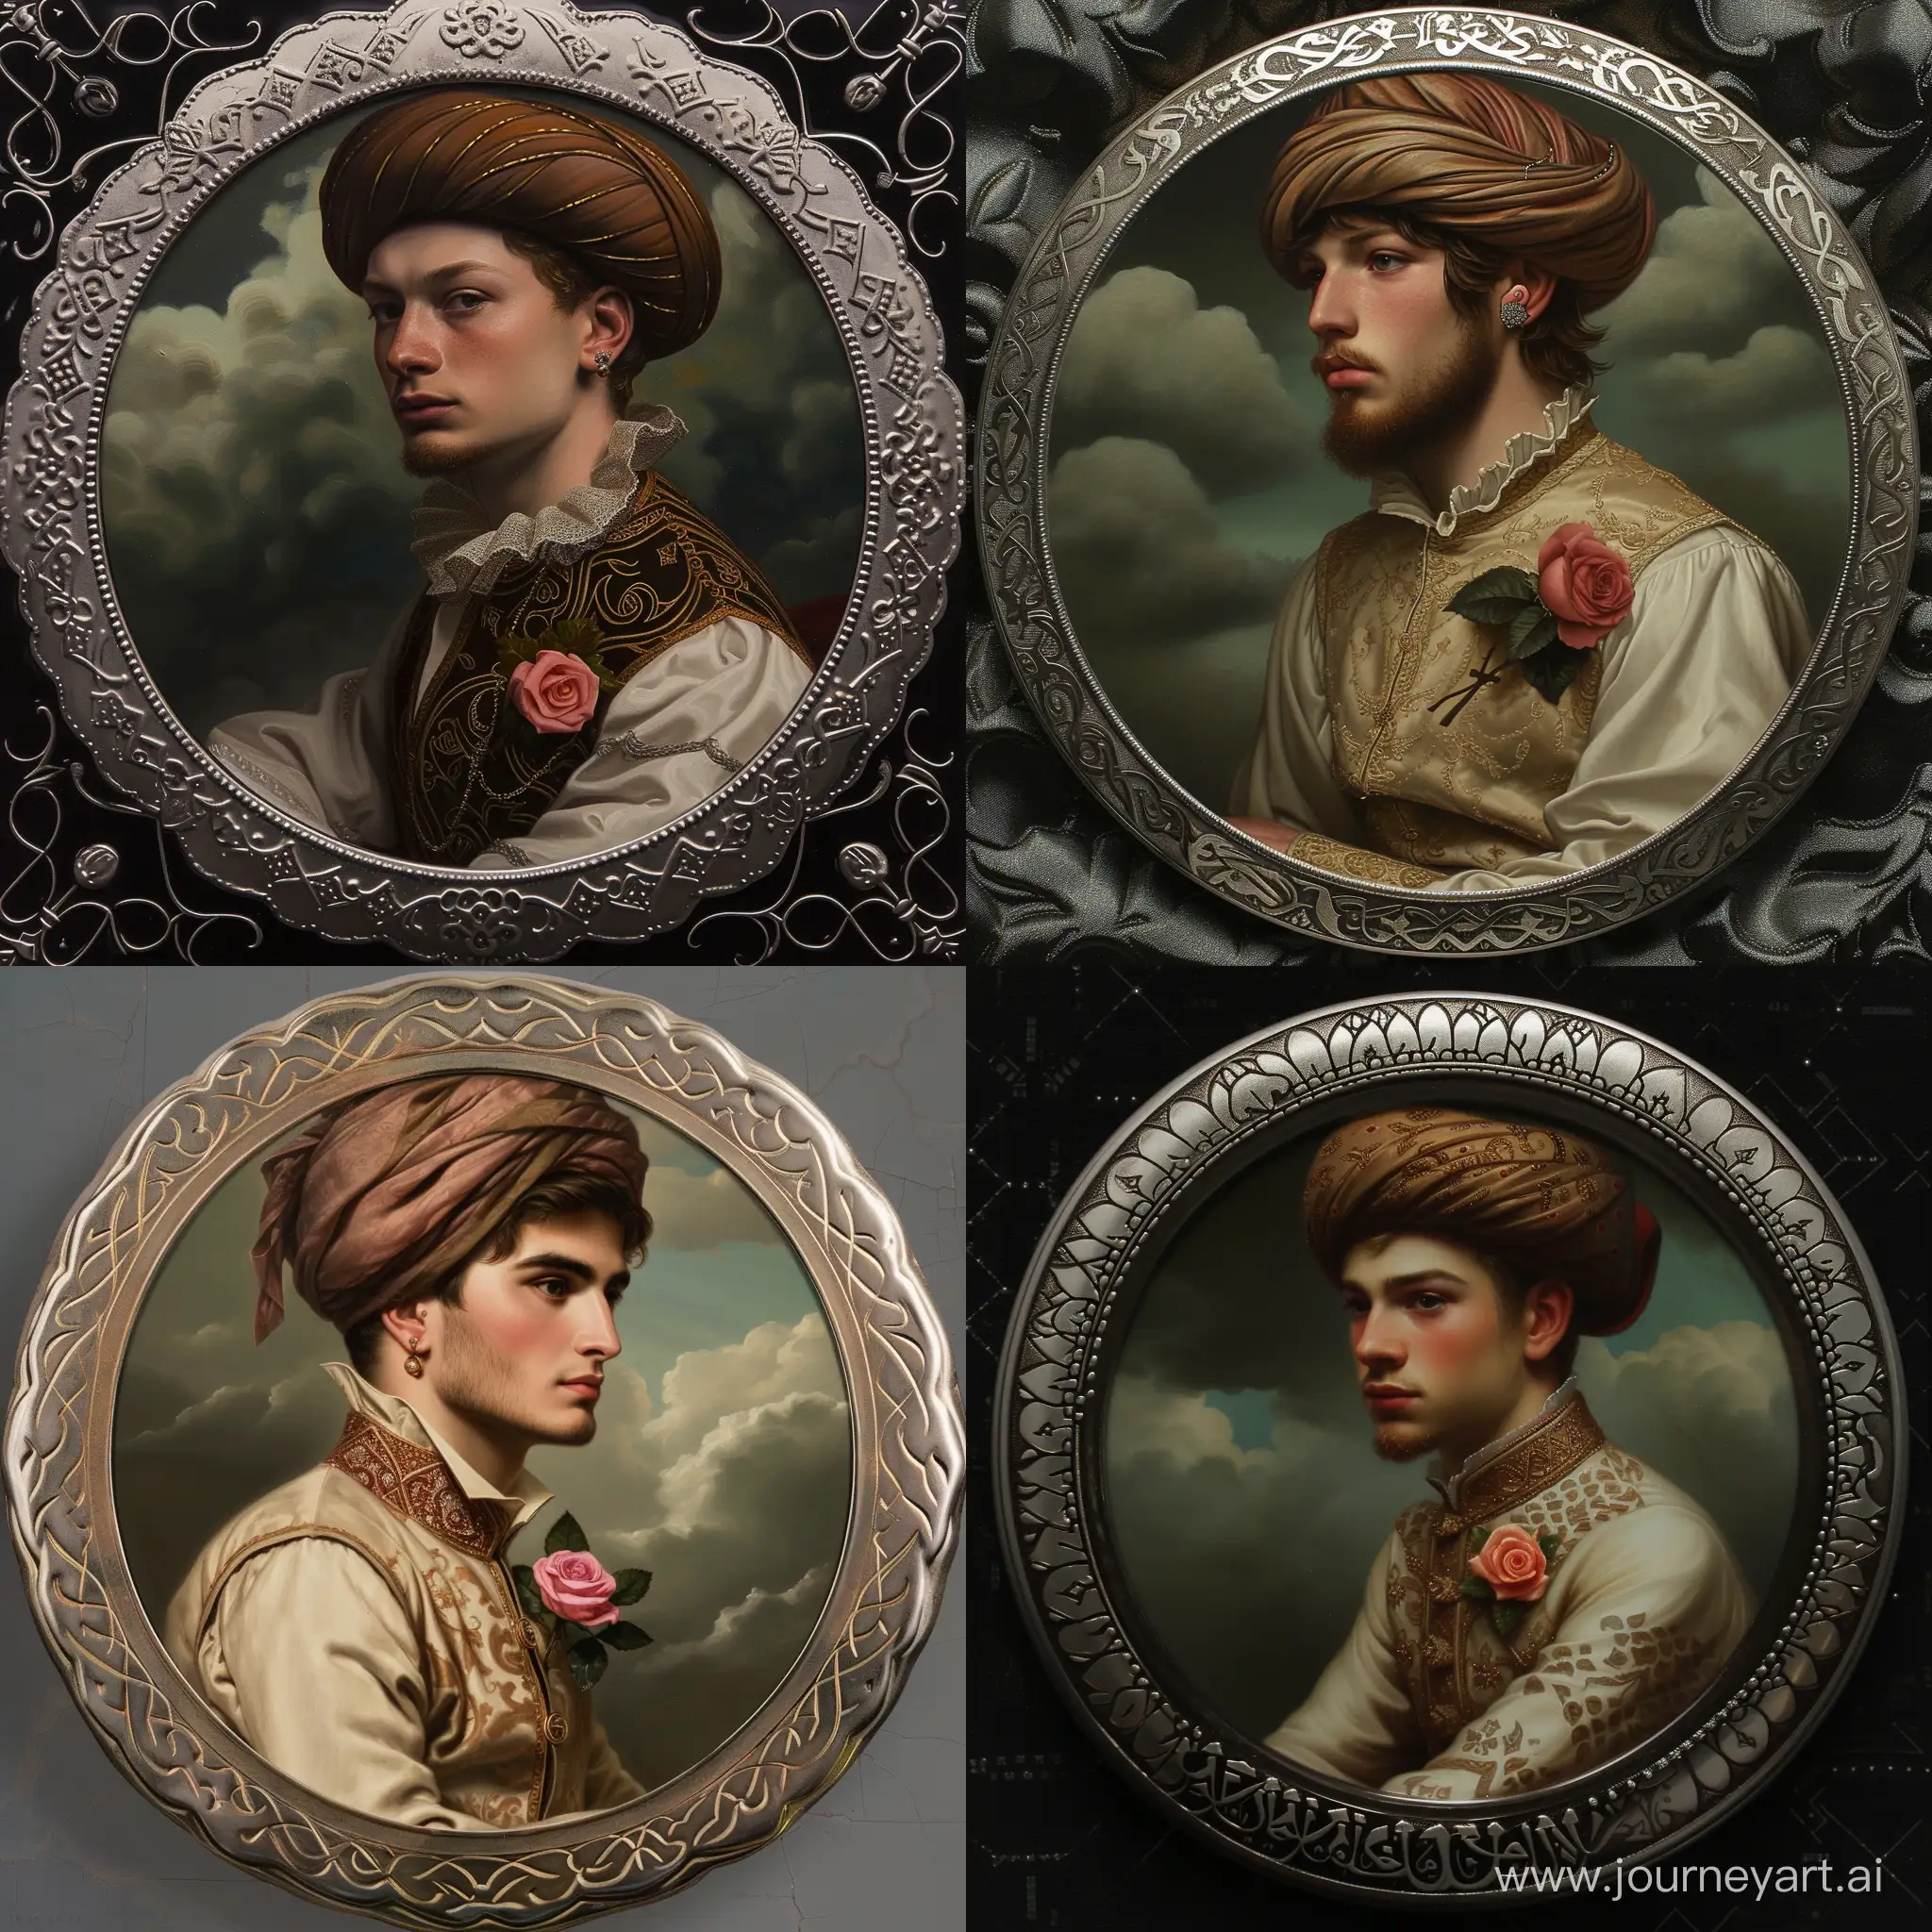 Medieval-Inspired-Portrait-Young-Man-in-Arabian-Attire-on-Porcelain-Seal